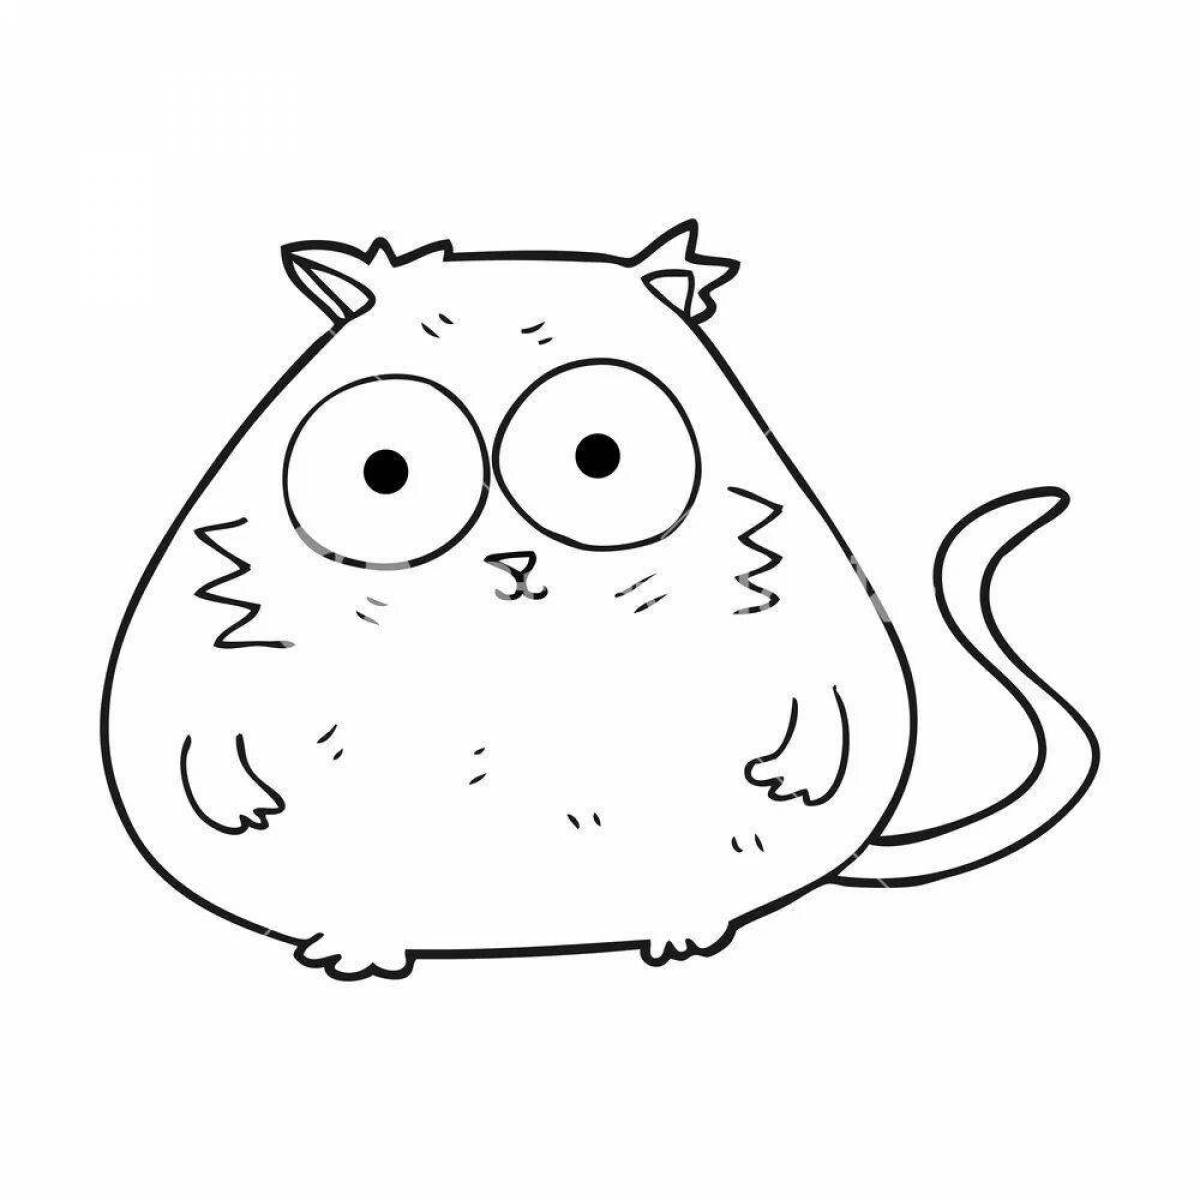 Affectionate chubby cat coloring page